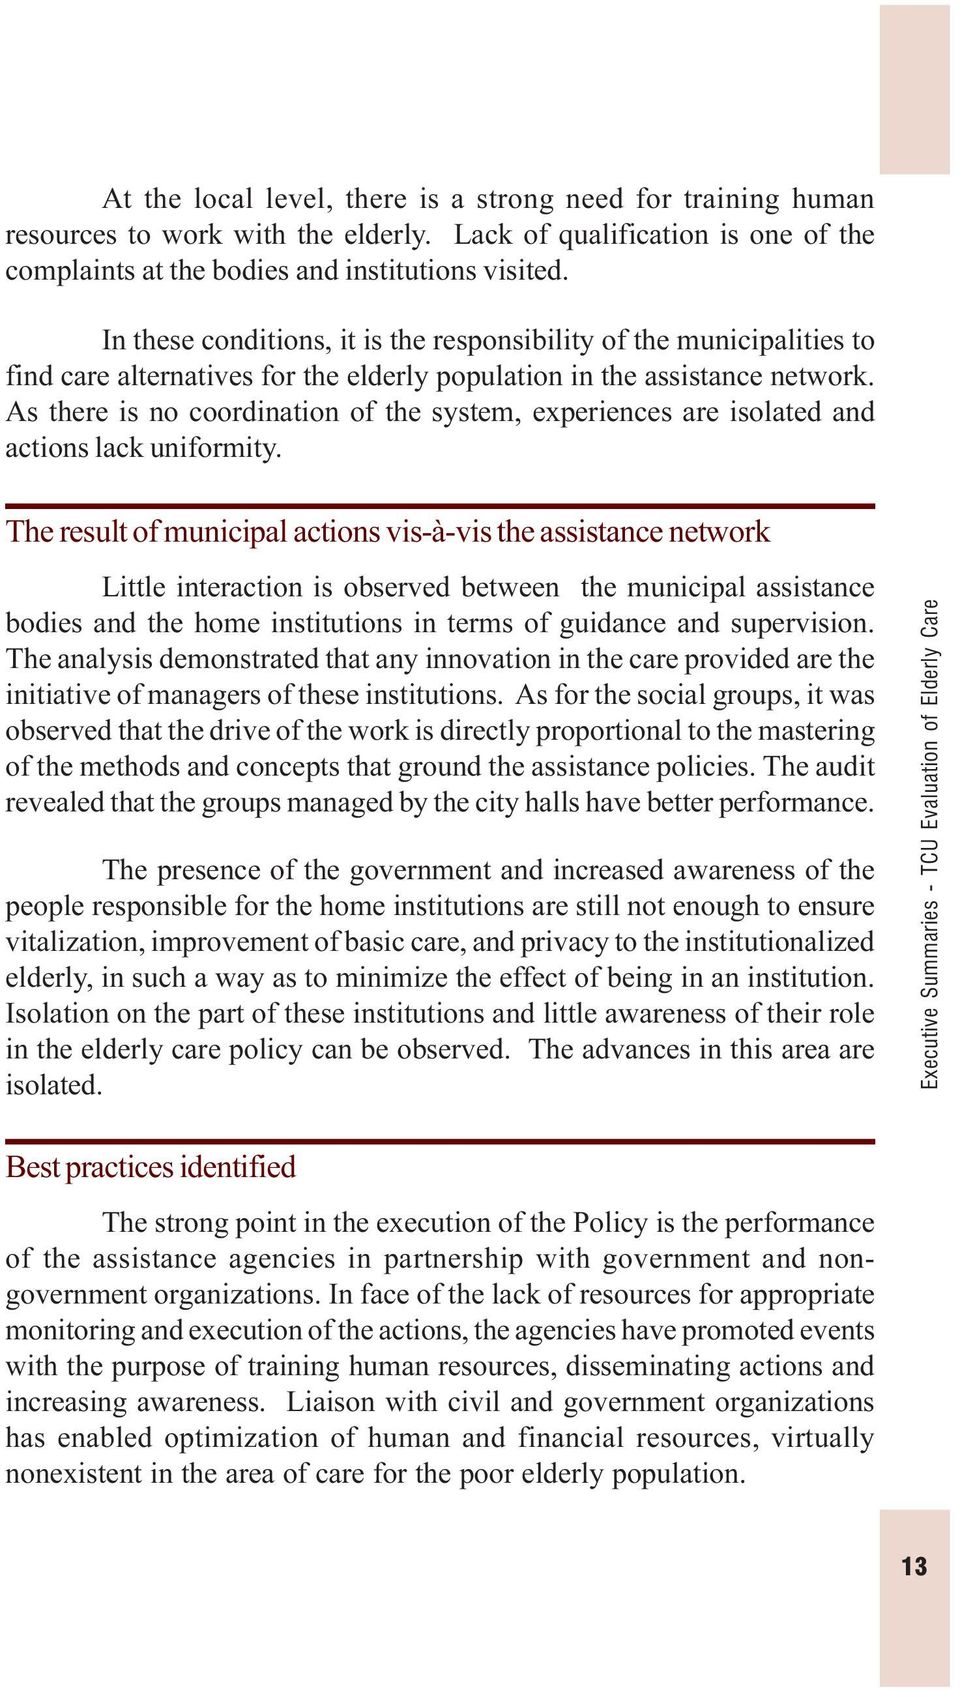 As there is no coordination of the system, experiences are isolated and actions lack uniformity.